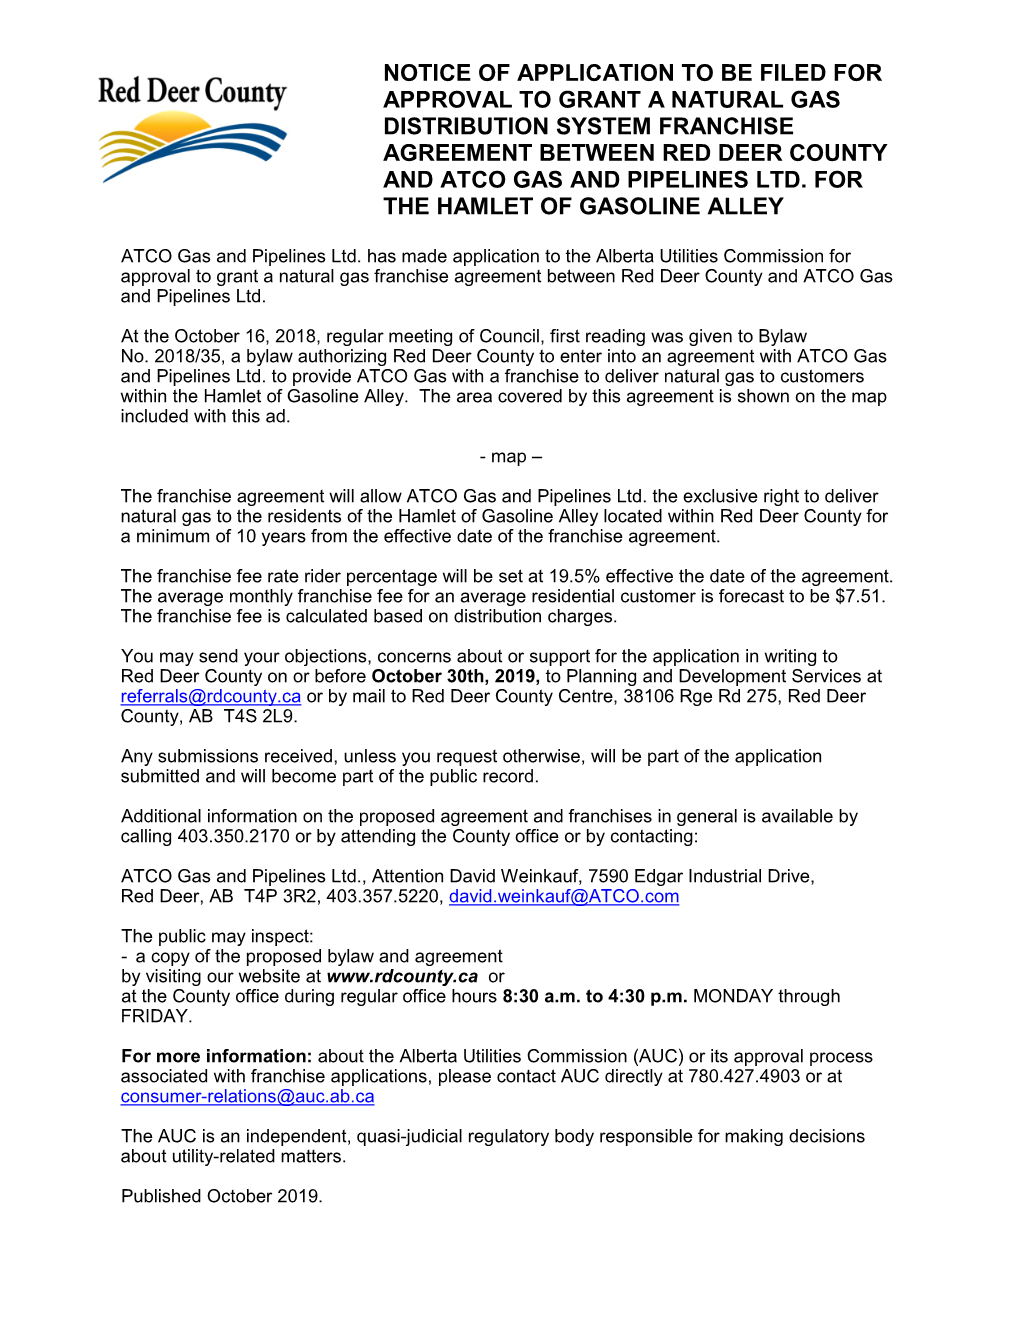 Notice of Application to Be Filed for Approval to Grant a Natural Gas Distribution System Franchise Agreement Between Red Deer County and Atco Gas and Pipelines Ltd